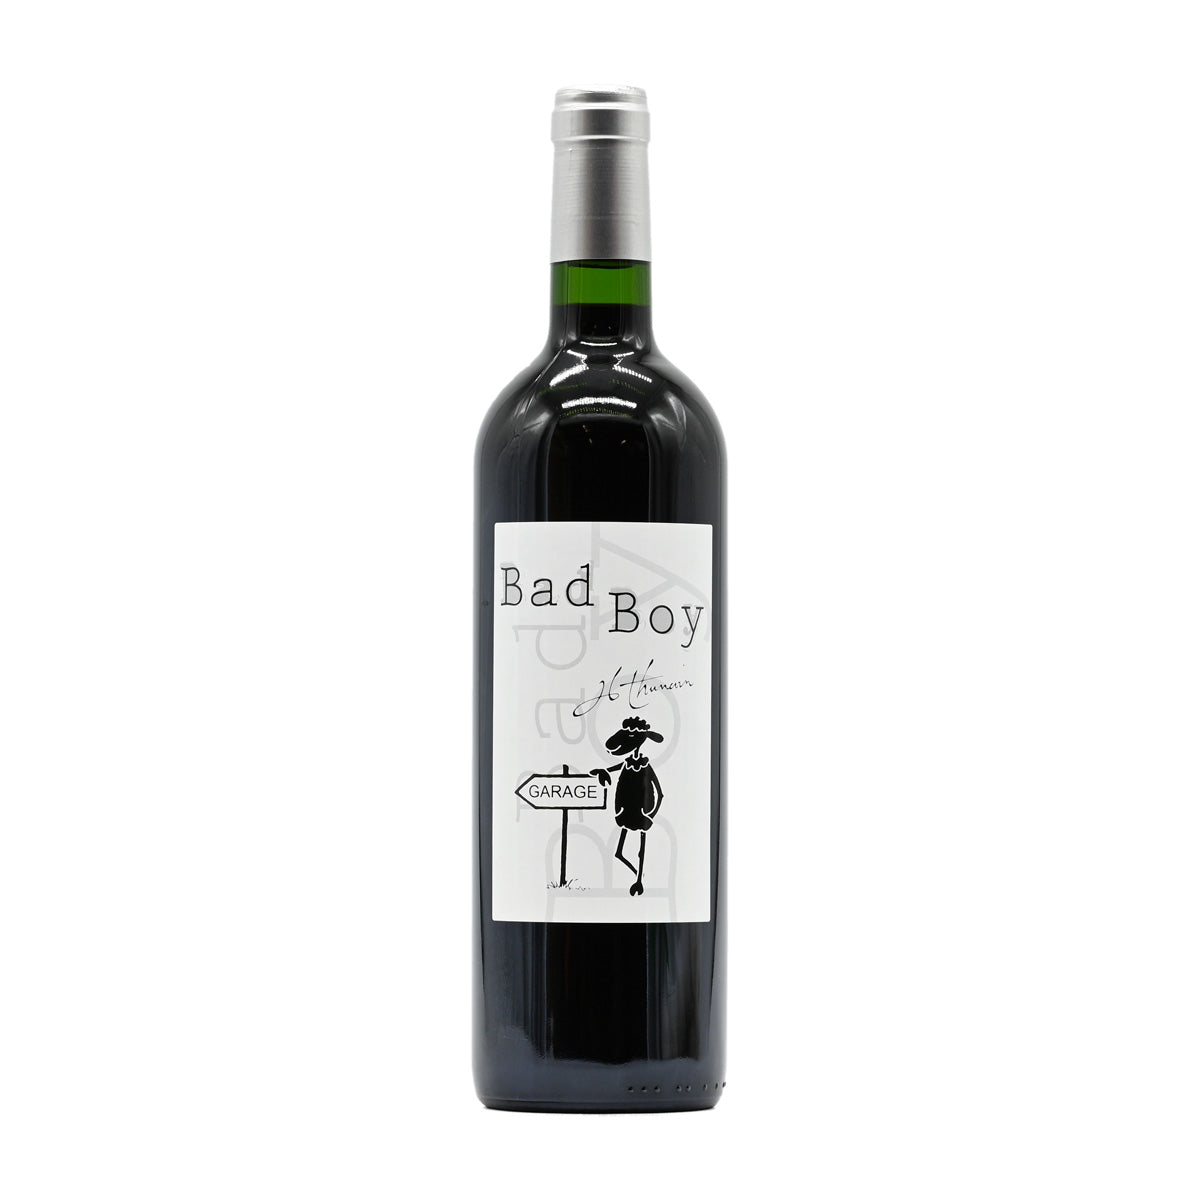 Bad Boy Garage 2016 – naughty Jean-Luc Thunevin – French Red Wine made from cabernet sauvignon and merlot blend from Bordeaux, France | GDV Fine Wines, Hong Kong